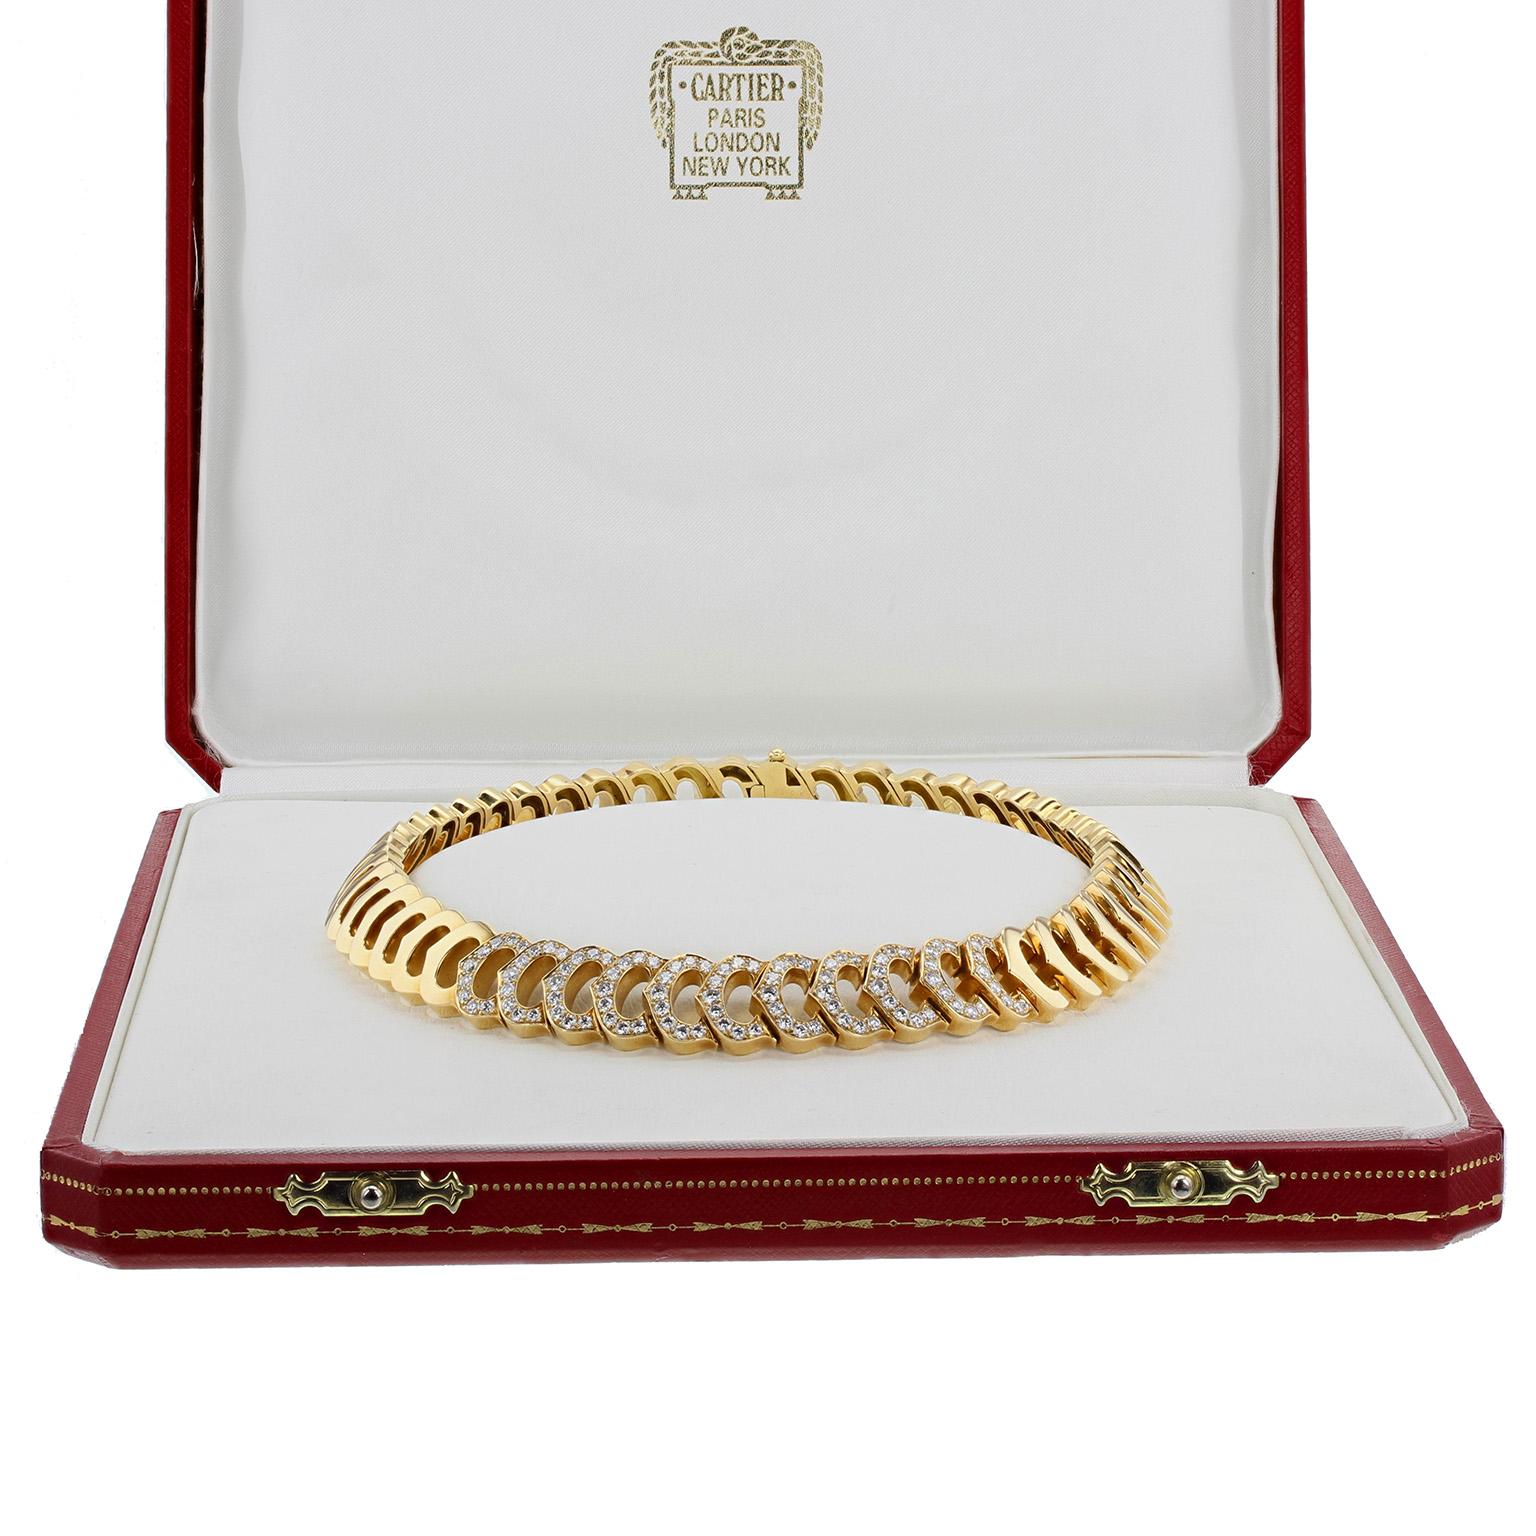 From the C de Cartier collection, this choker necklace features links in the style of the famous Cartier 'C' motif. The front 11 links are set with brilliant-cut diamonds of VVS1 clarity, F colour, and approximately seven carats. Signed Cartier and